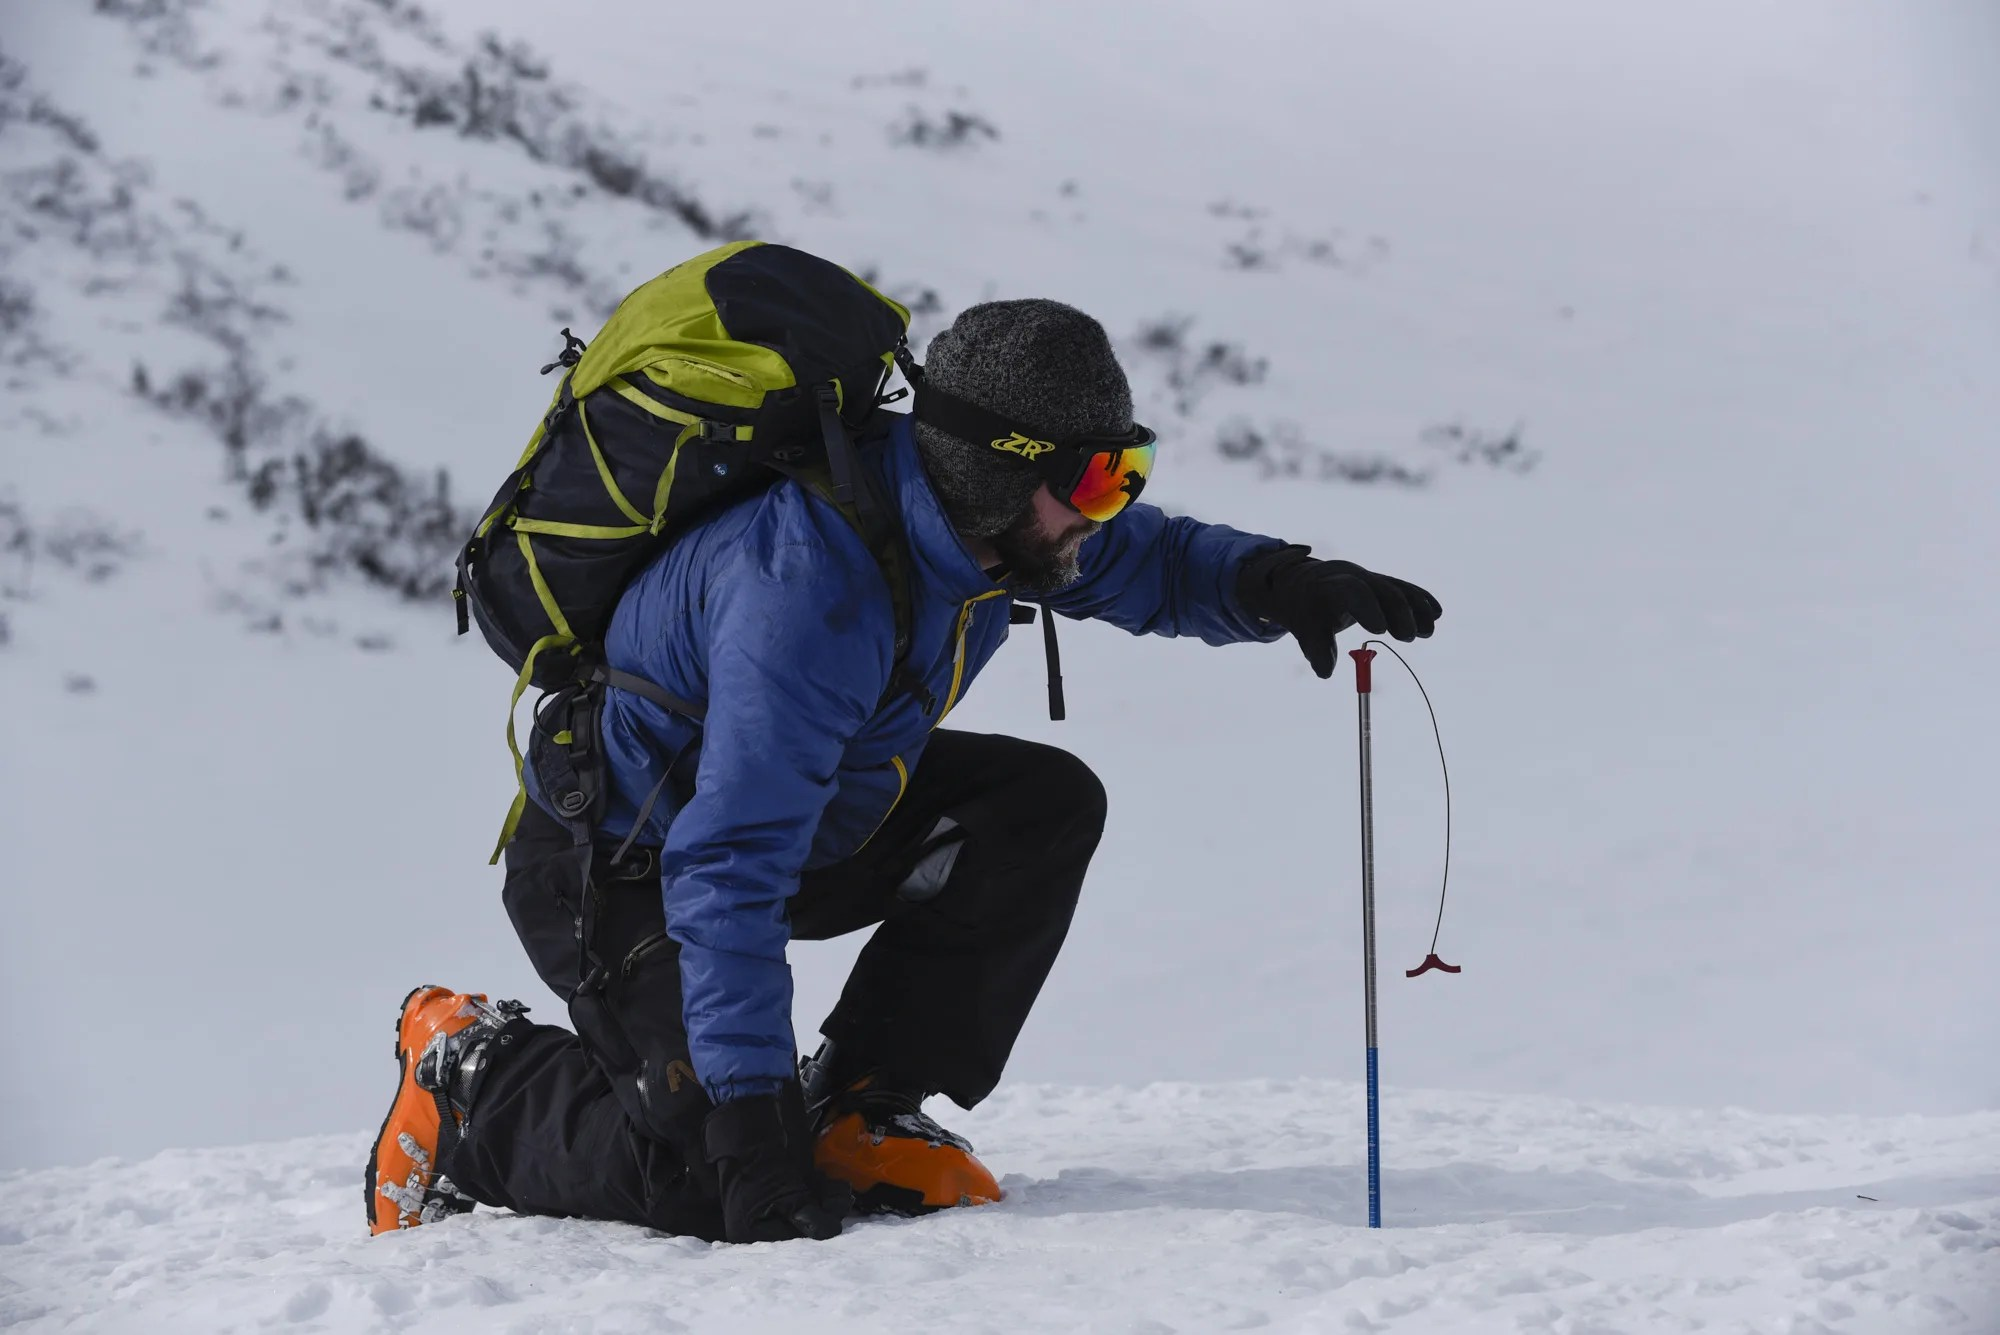 Ryan Crumley measures snow depth in the White Mountains of New Hampshire.